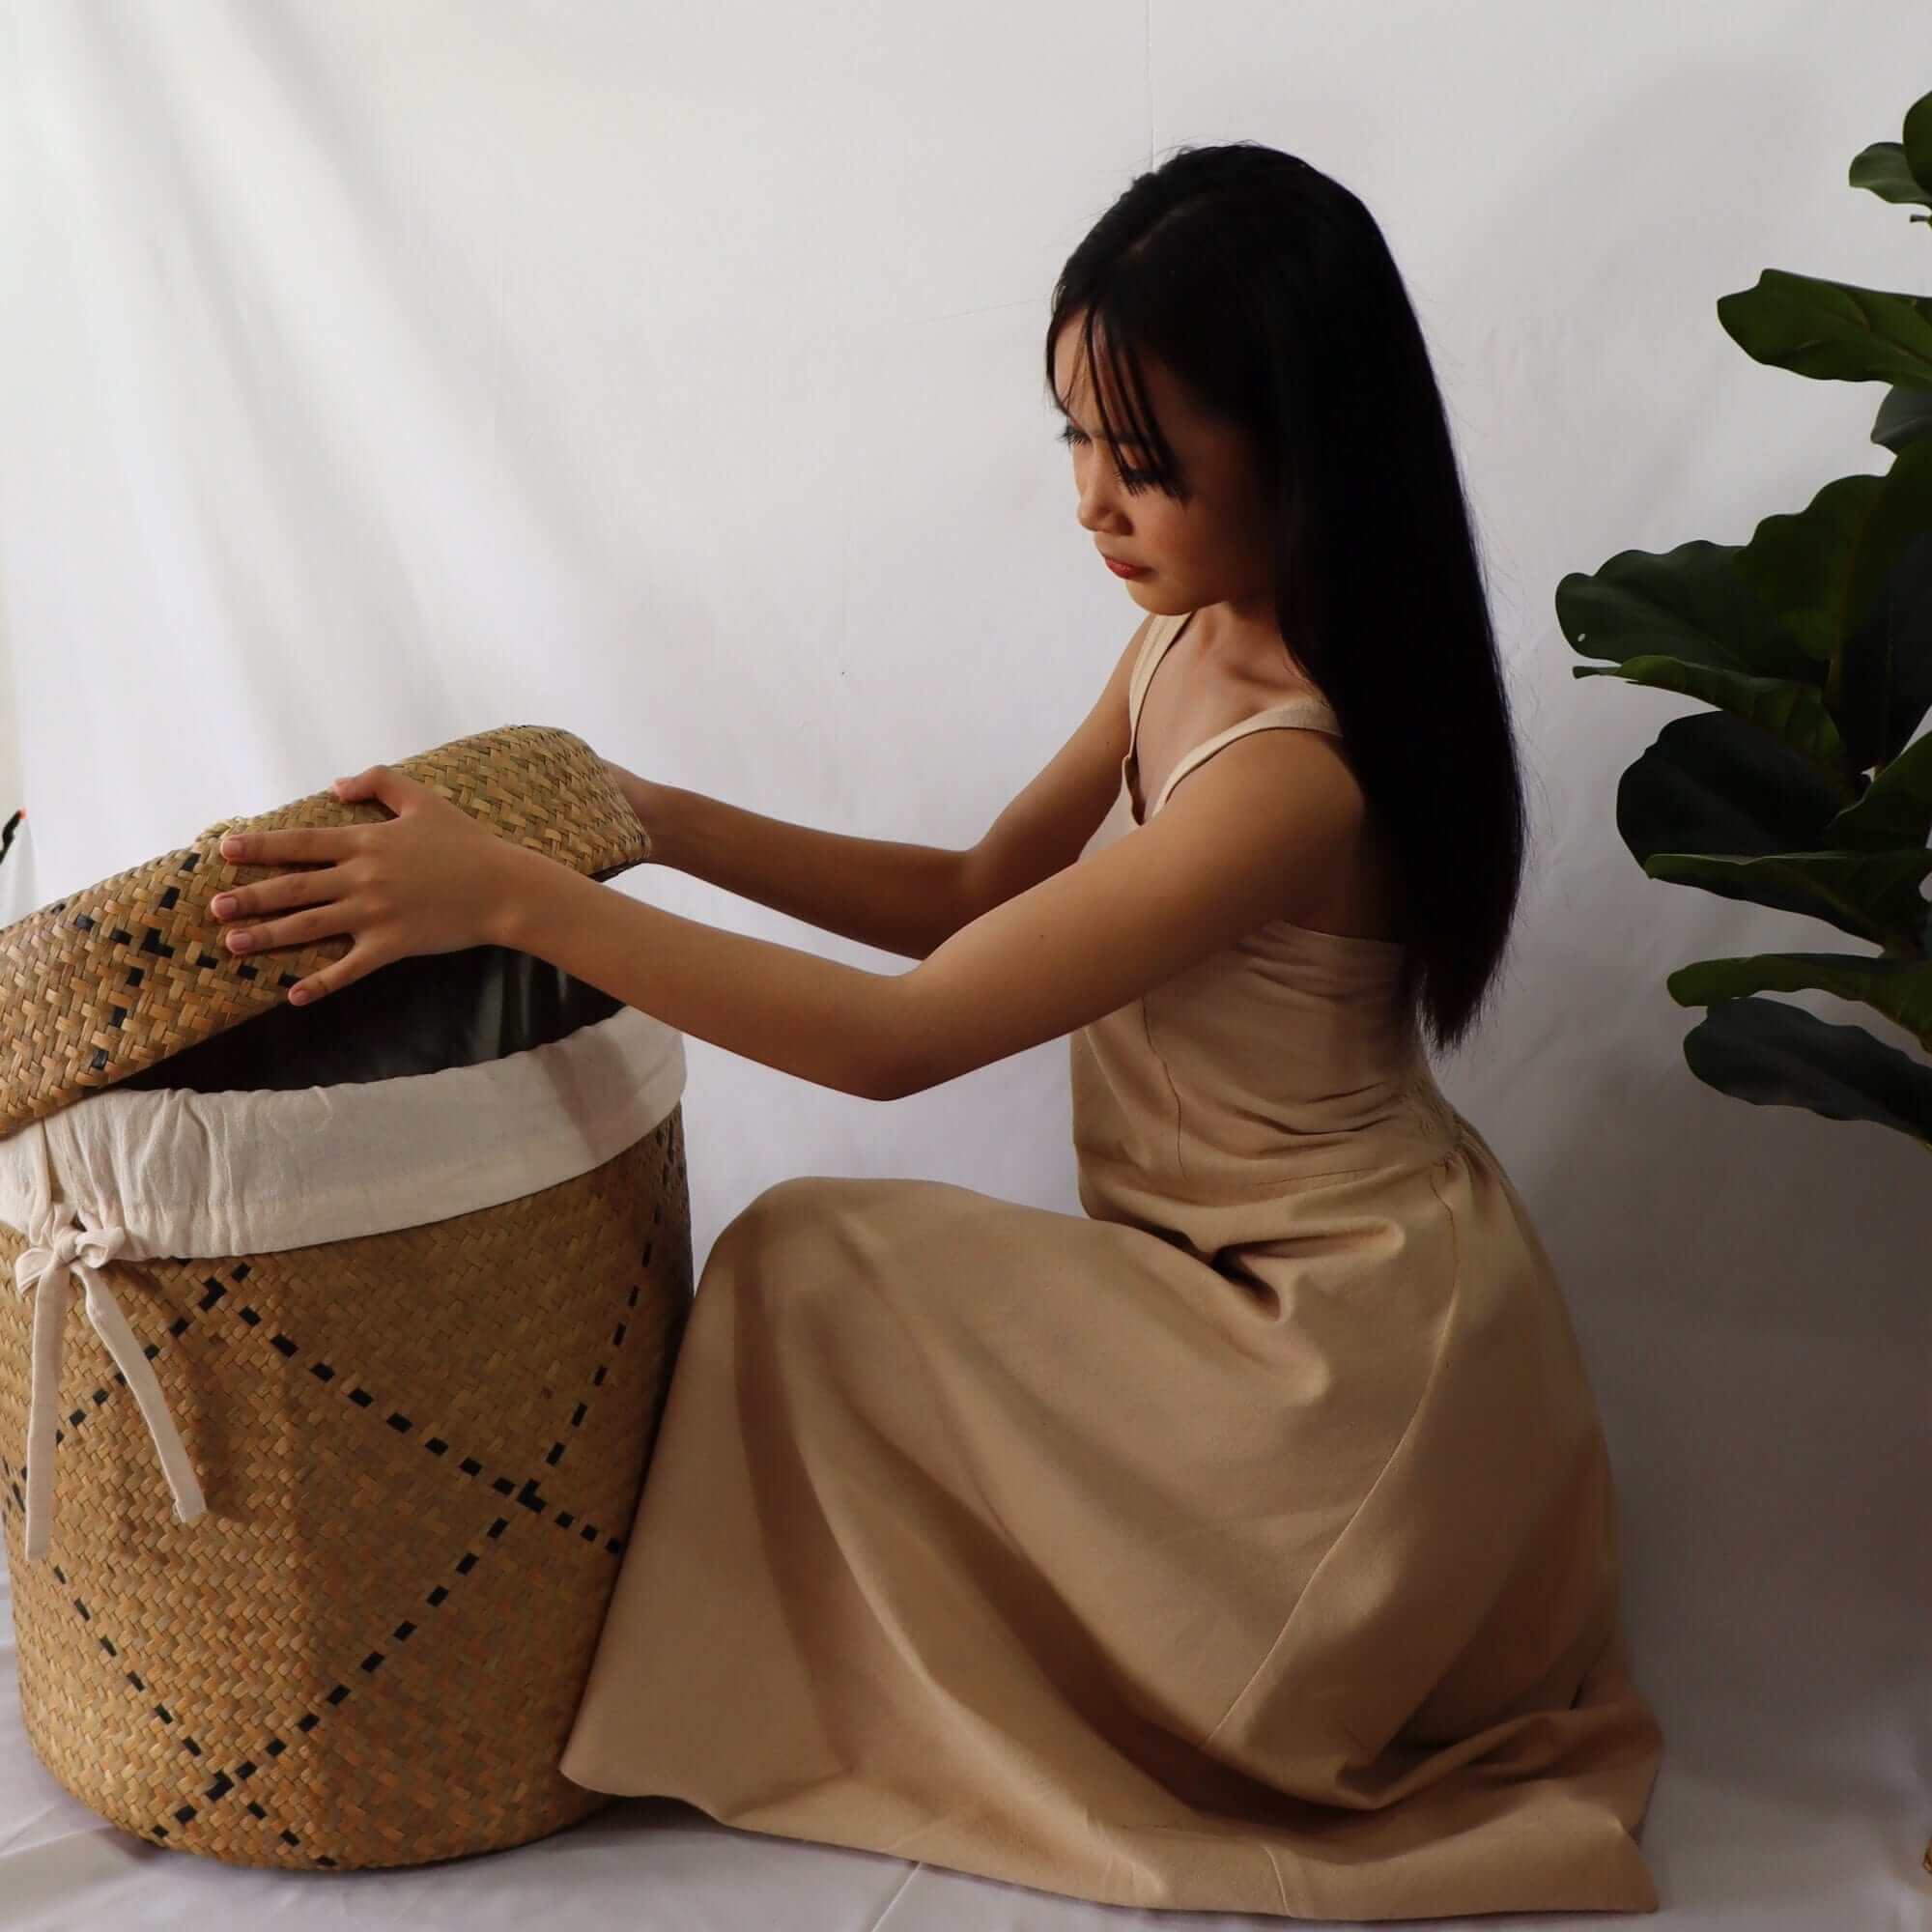 KU MUD Organize in Style with our Handwoven Laundry Basket